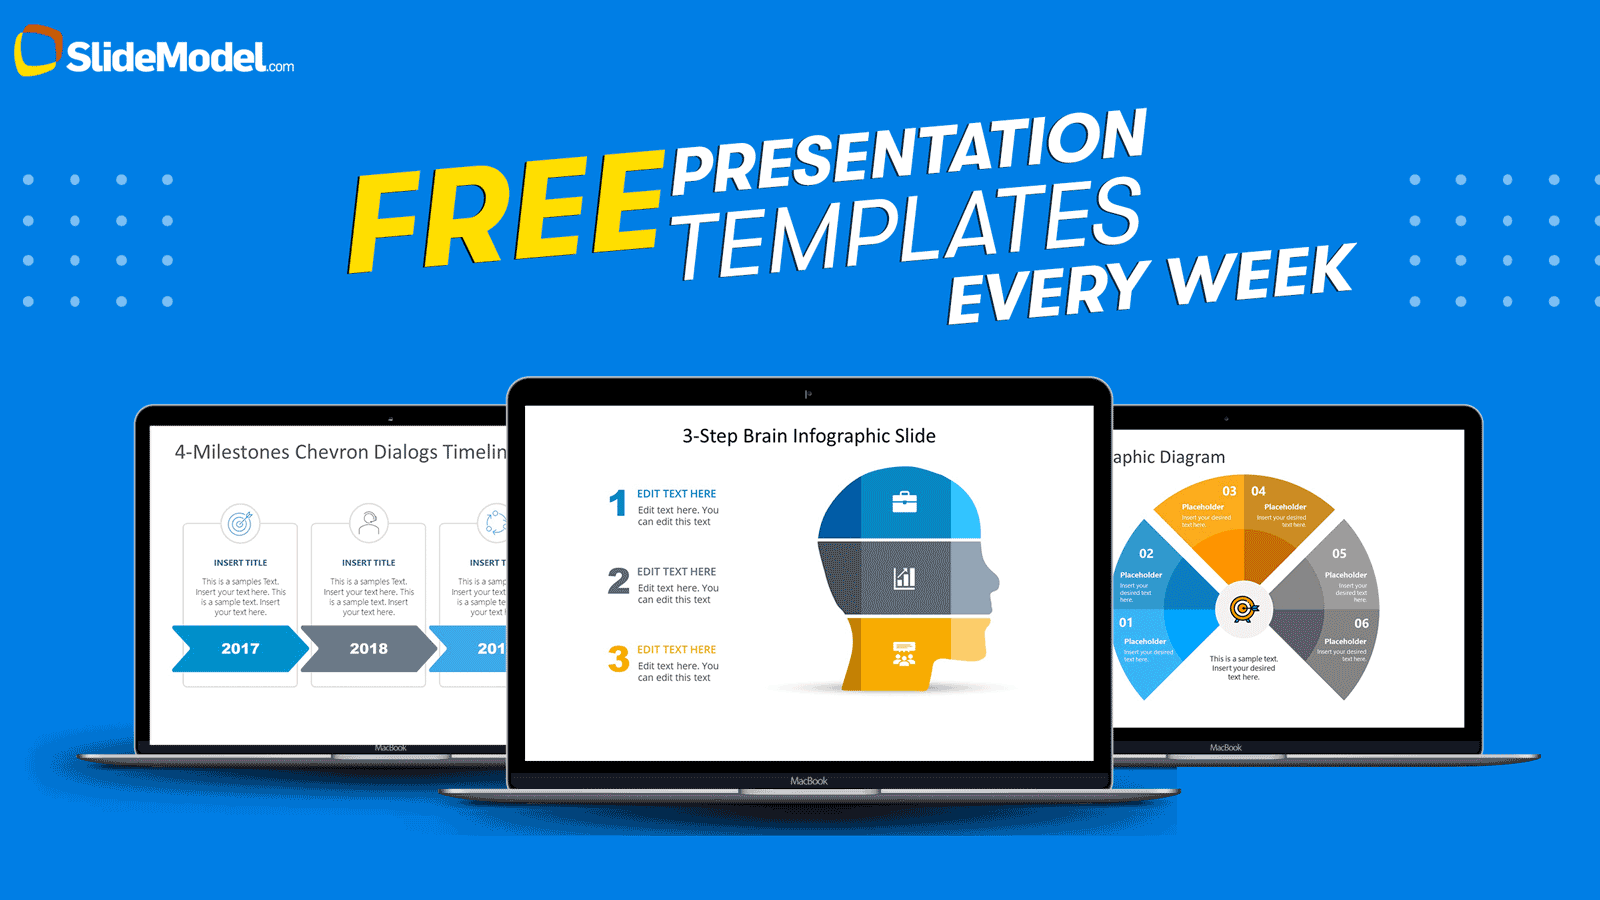 Where can I find free slide templates?